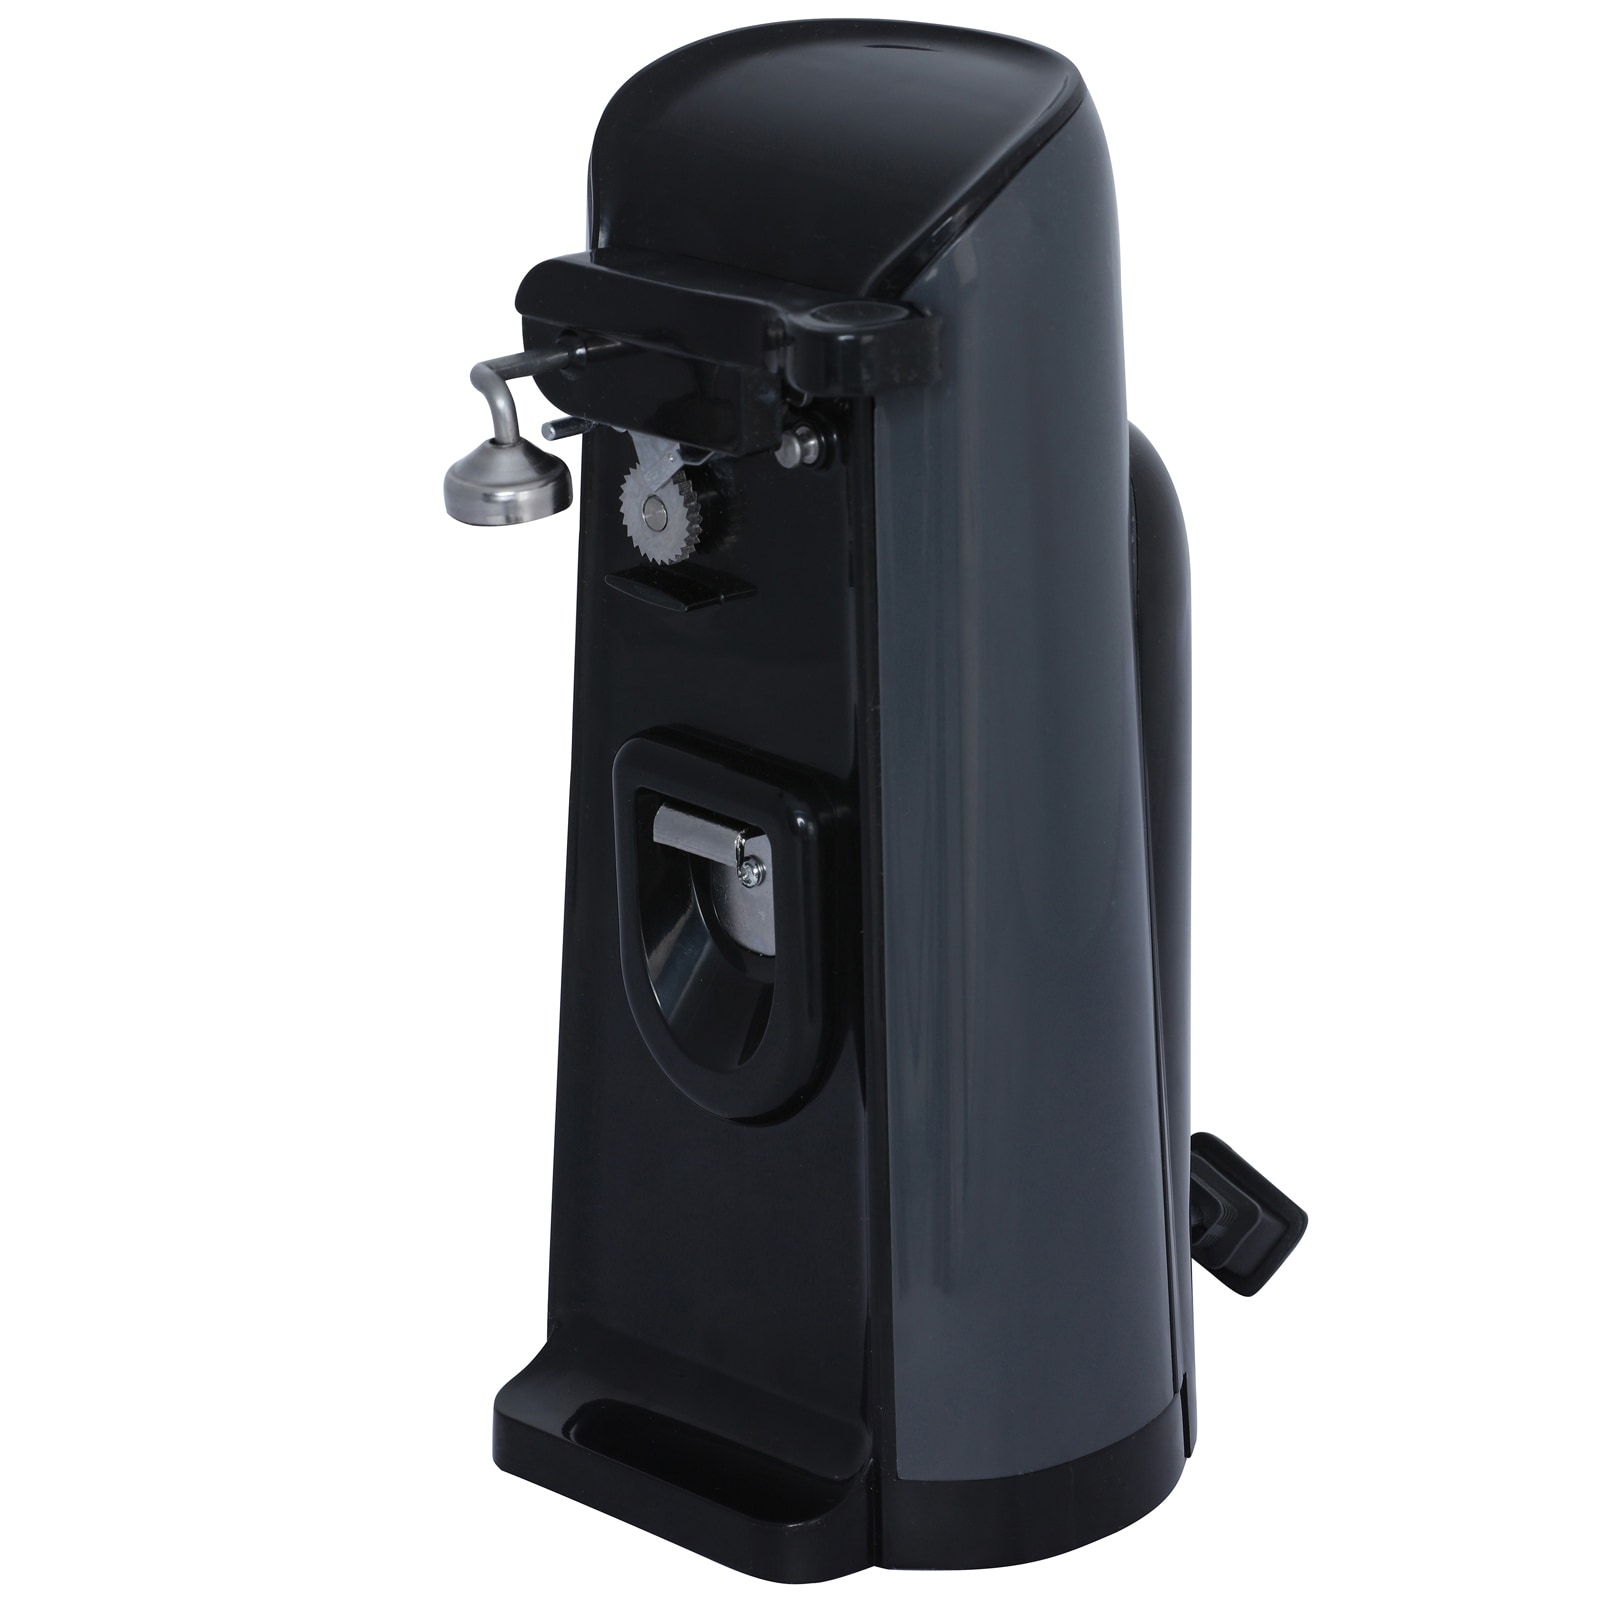 Electric Commercial Can Opener Automatic Smooth Edge Stainless Steal Hands  Free